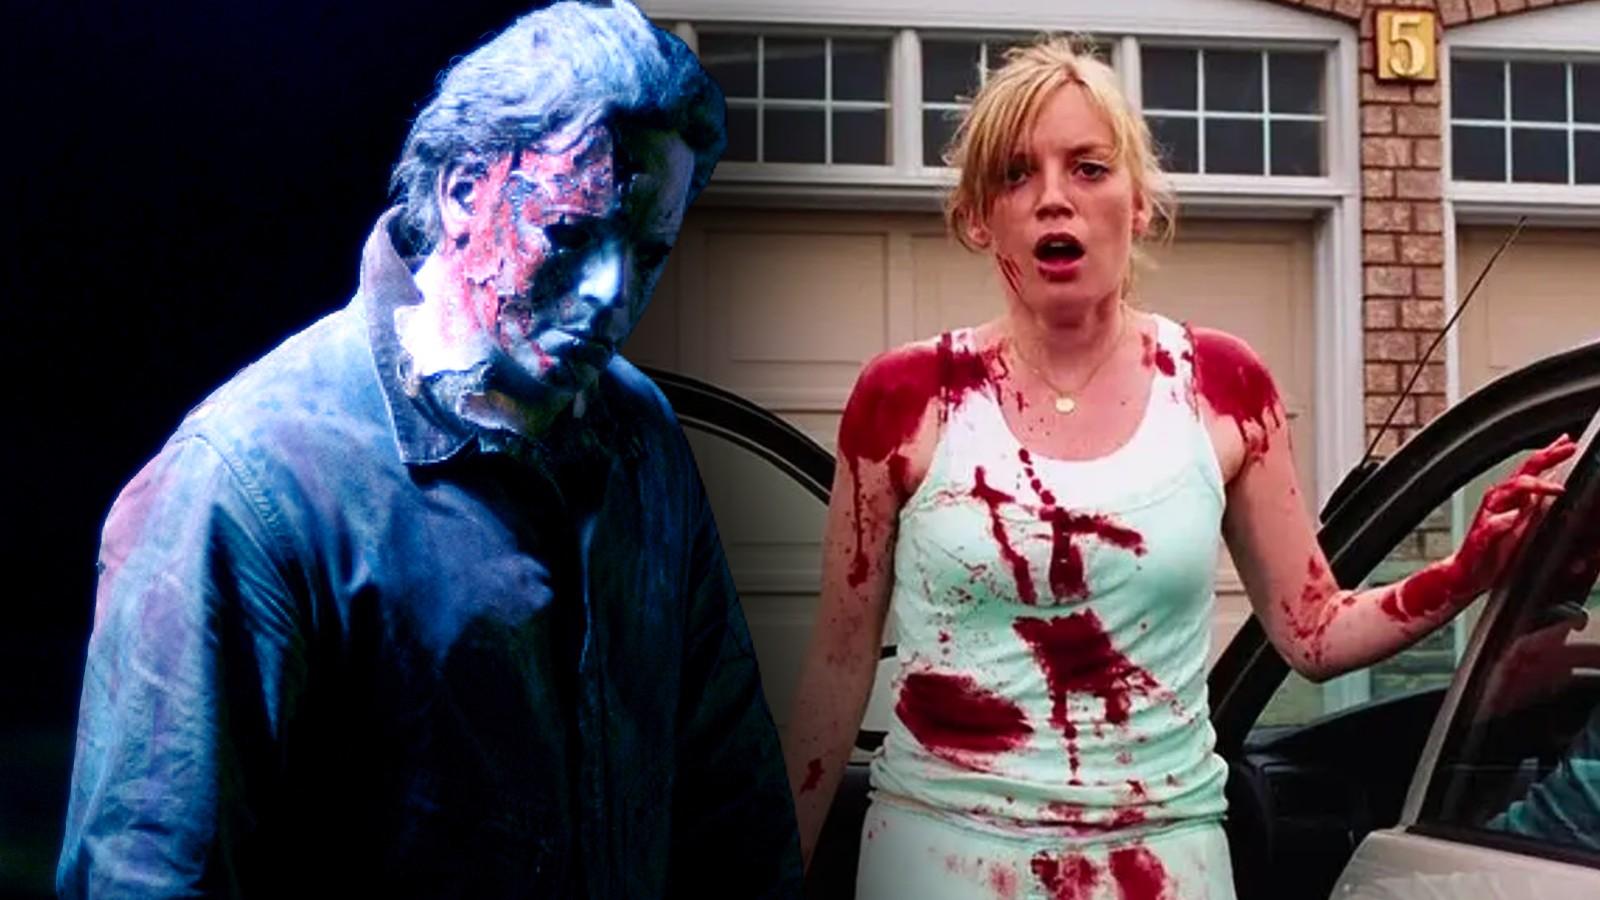 Stills from Halloween 2 and Dawn of the Dead